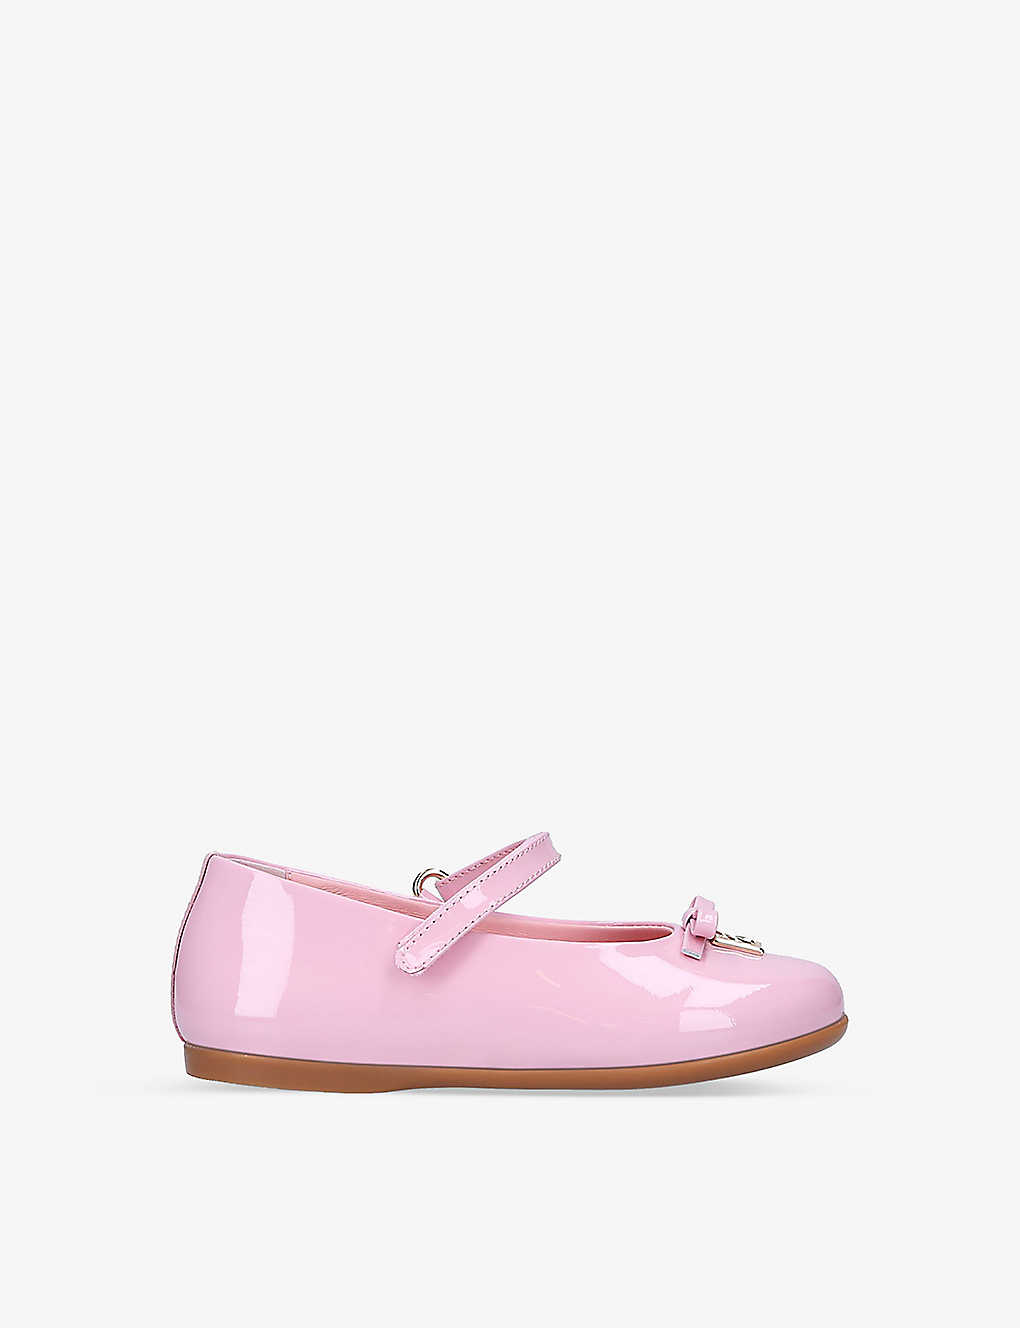 Dolce & Gabbana Kids' Vernice Dg-logo Patent-leather Ballet Flats 6 Months-4 Years In Pale Pink